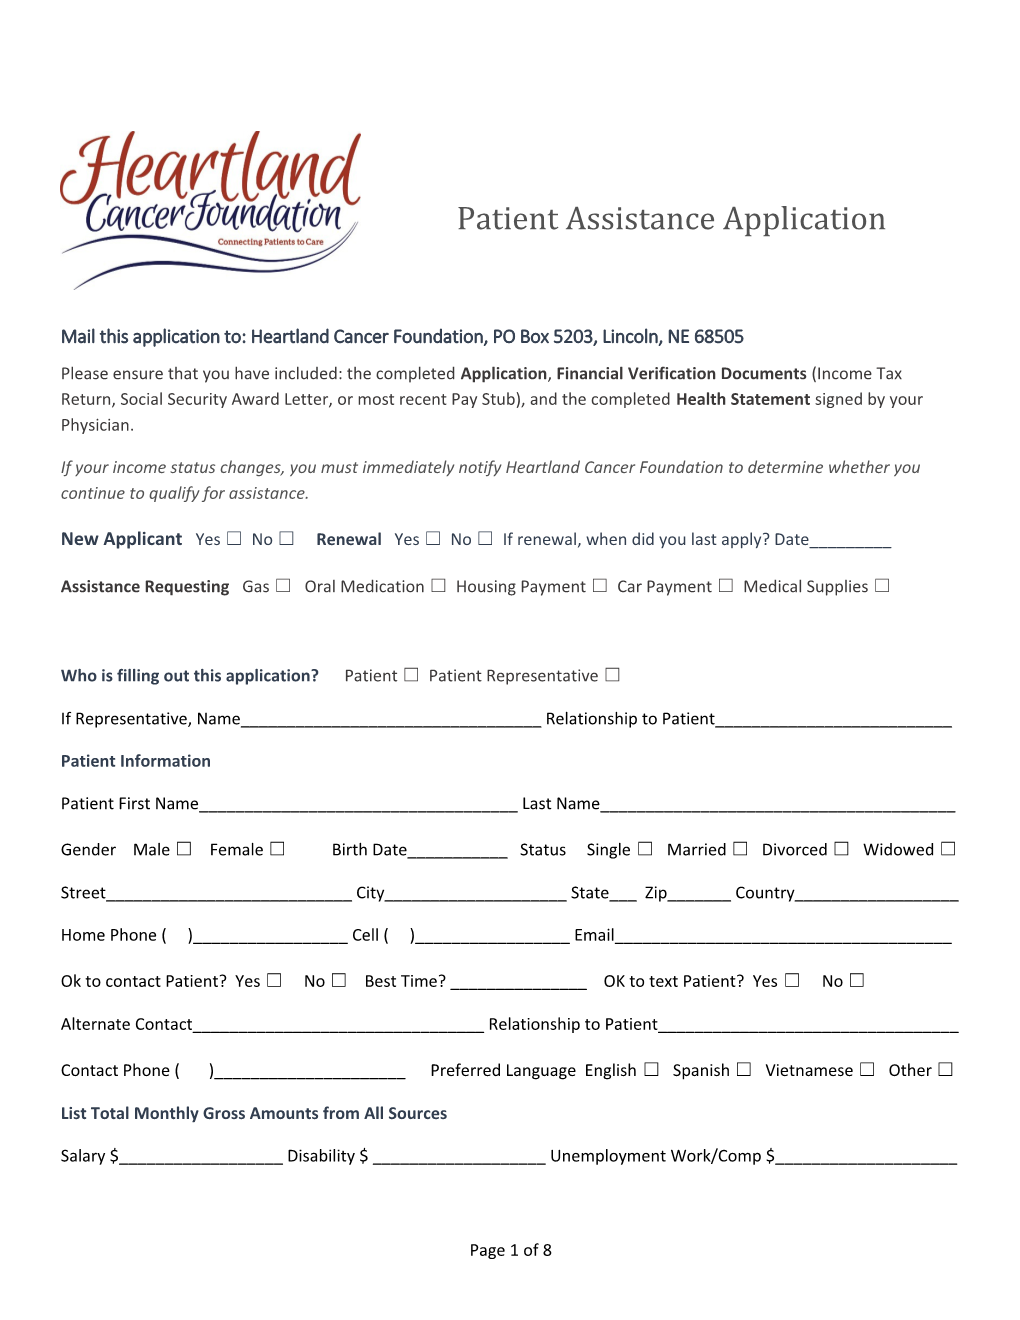 Mail This Application To: Heartland Cancer Foundation, PO Box 5203, Lincoln, NE 68505